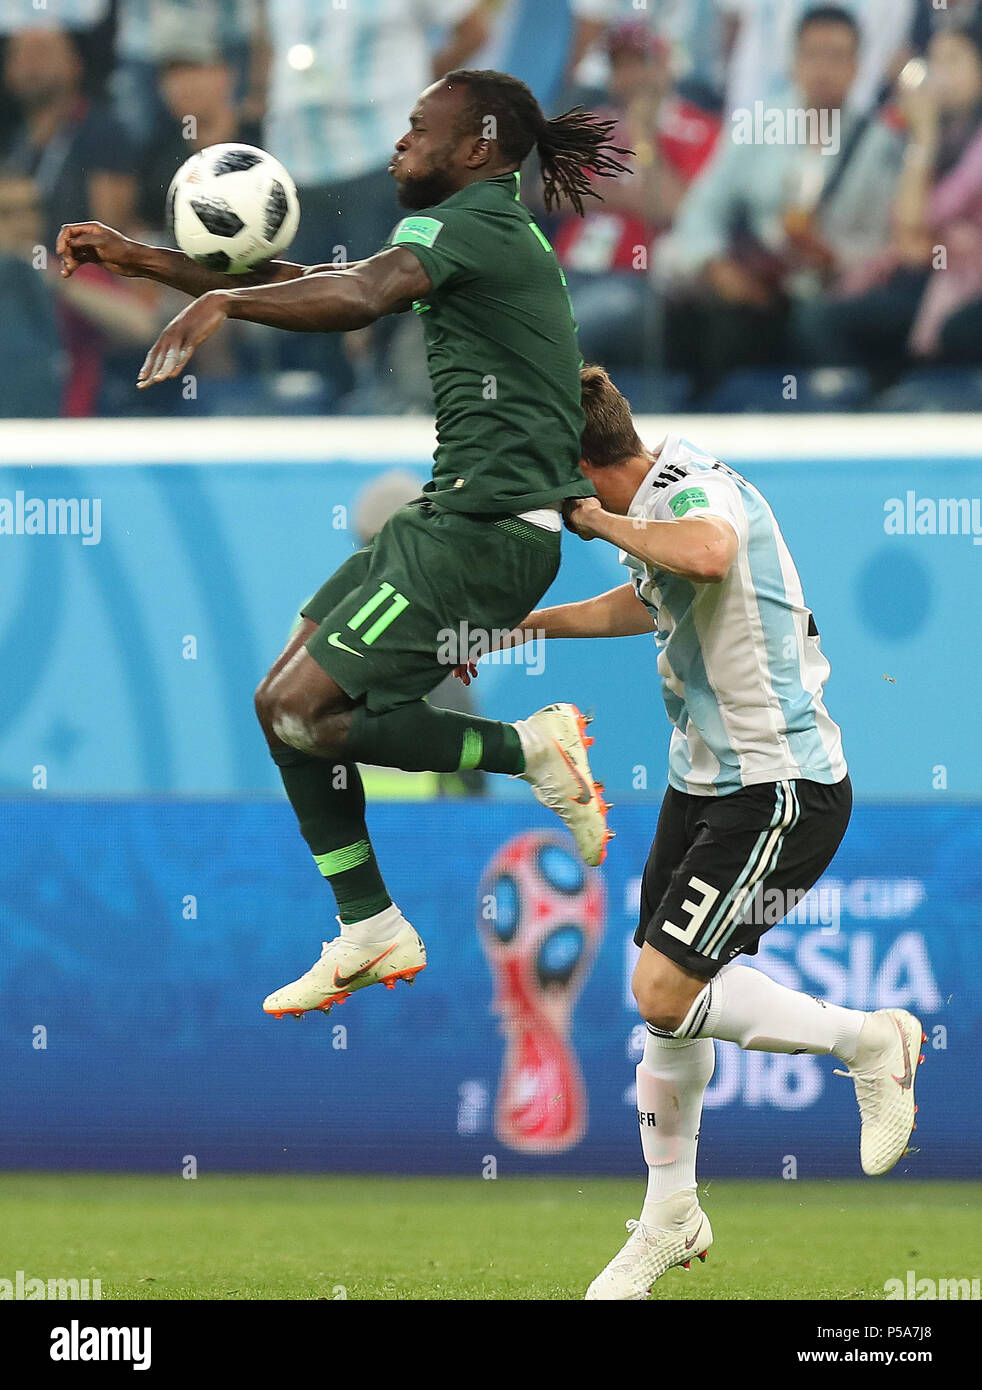 Saint Petersburg, Russia. 26th June, 2018. Victor Moses (top) of Nigeria vies with Nicolas Tagliafico of Argentina during the 2018 FIFA World Cup Group D match between Nigeria and Argentina in Saint Petersburg, Russia, June 26, 2018. Credit: Yang Lei/Xinhua/Alamy Live News Stock Photo